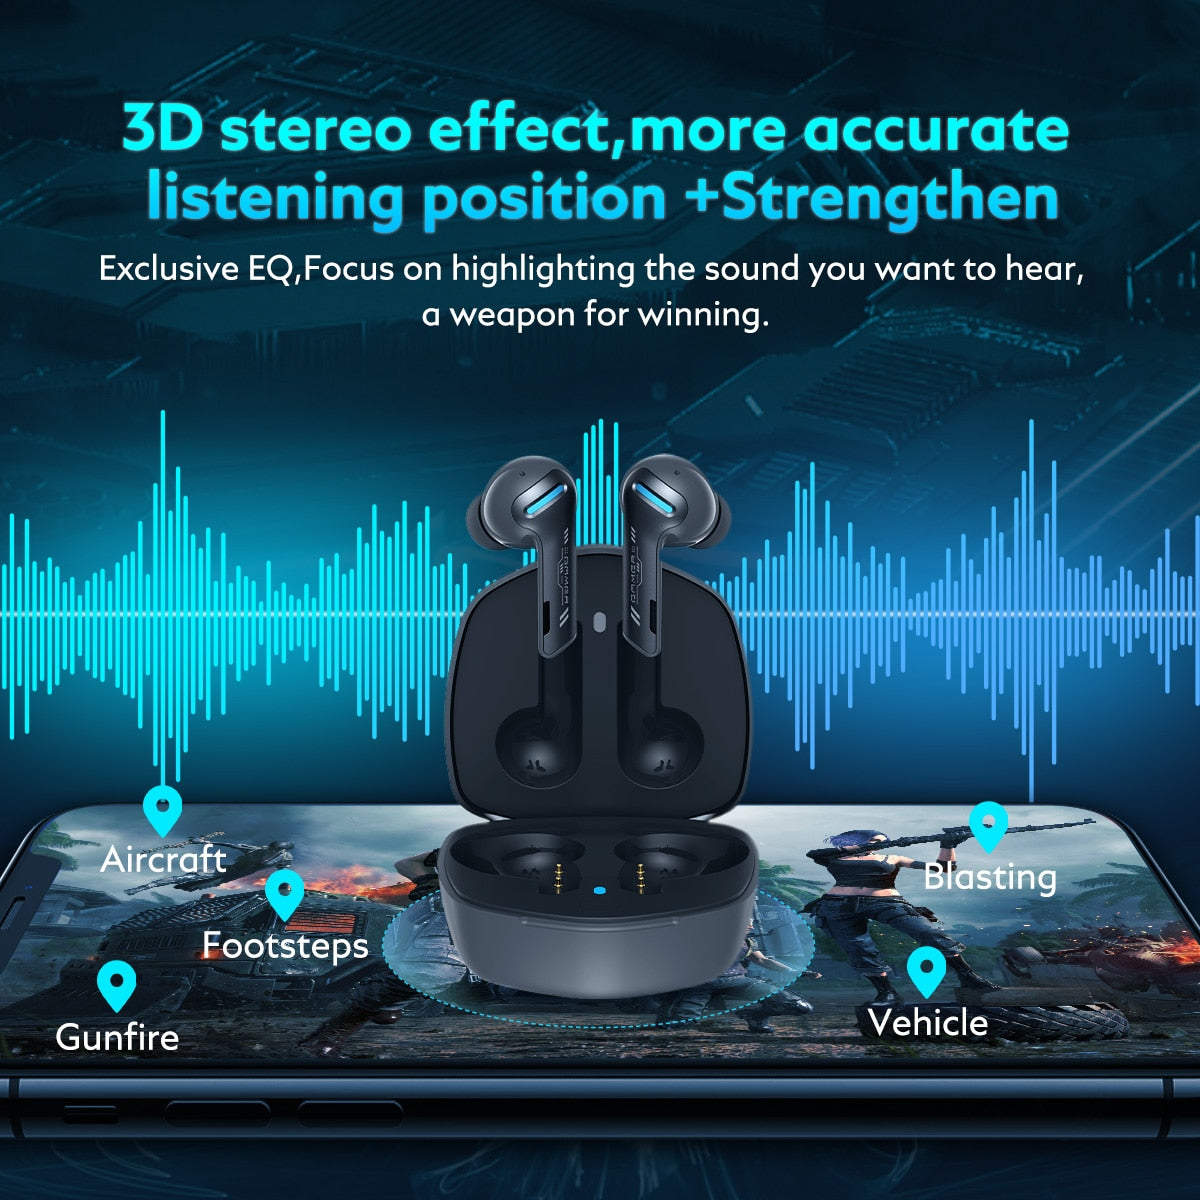 QCY G1 Gaming Earbuds 45ms Low Latency Headphone Stereo Sound Positioning TWS V5.2 Bluetooth Earphone 4 Mic+ENC Wireless Headset